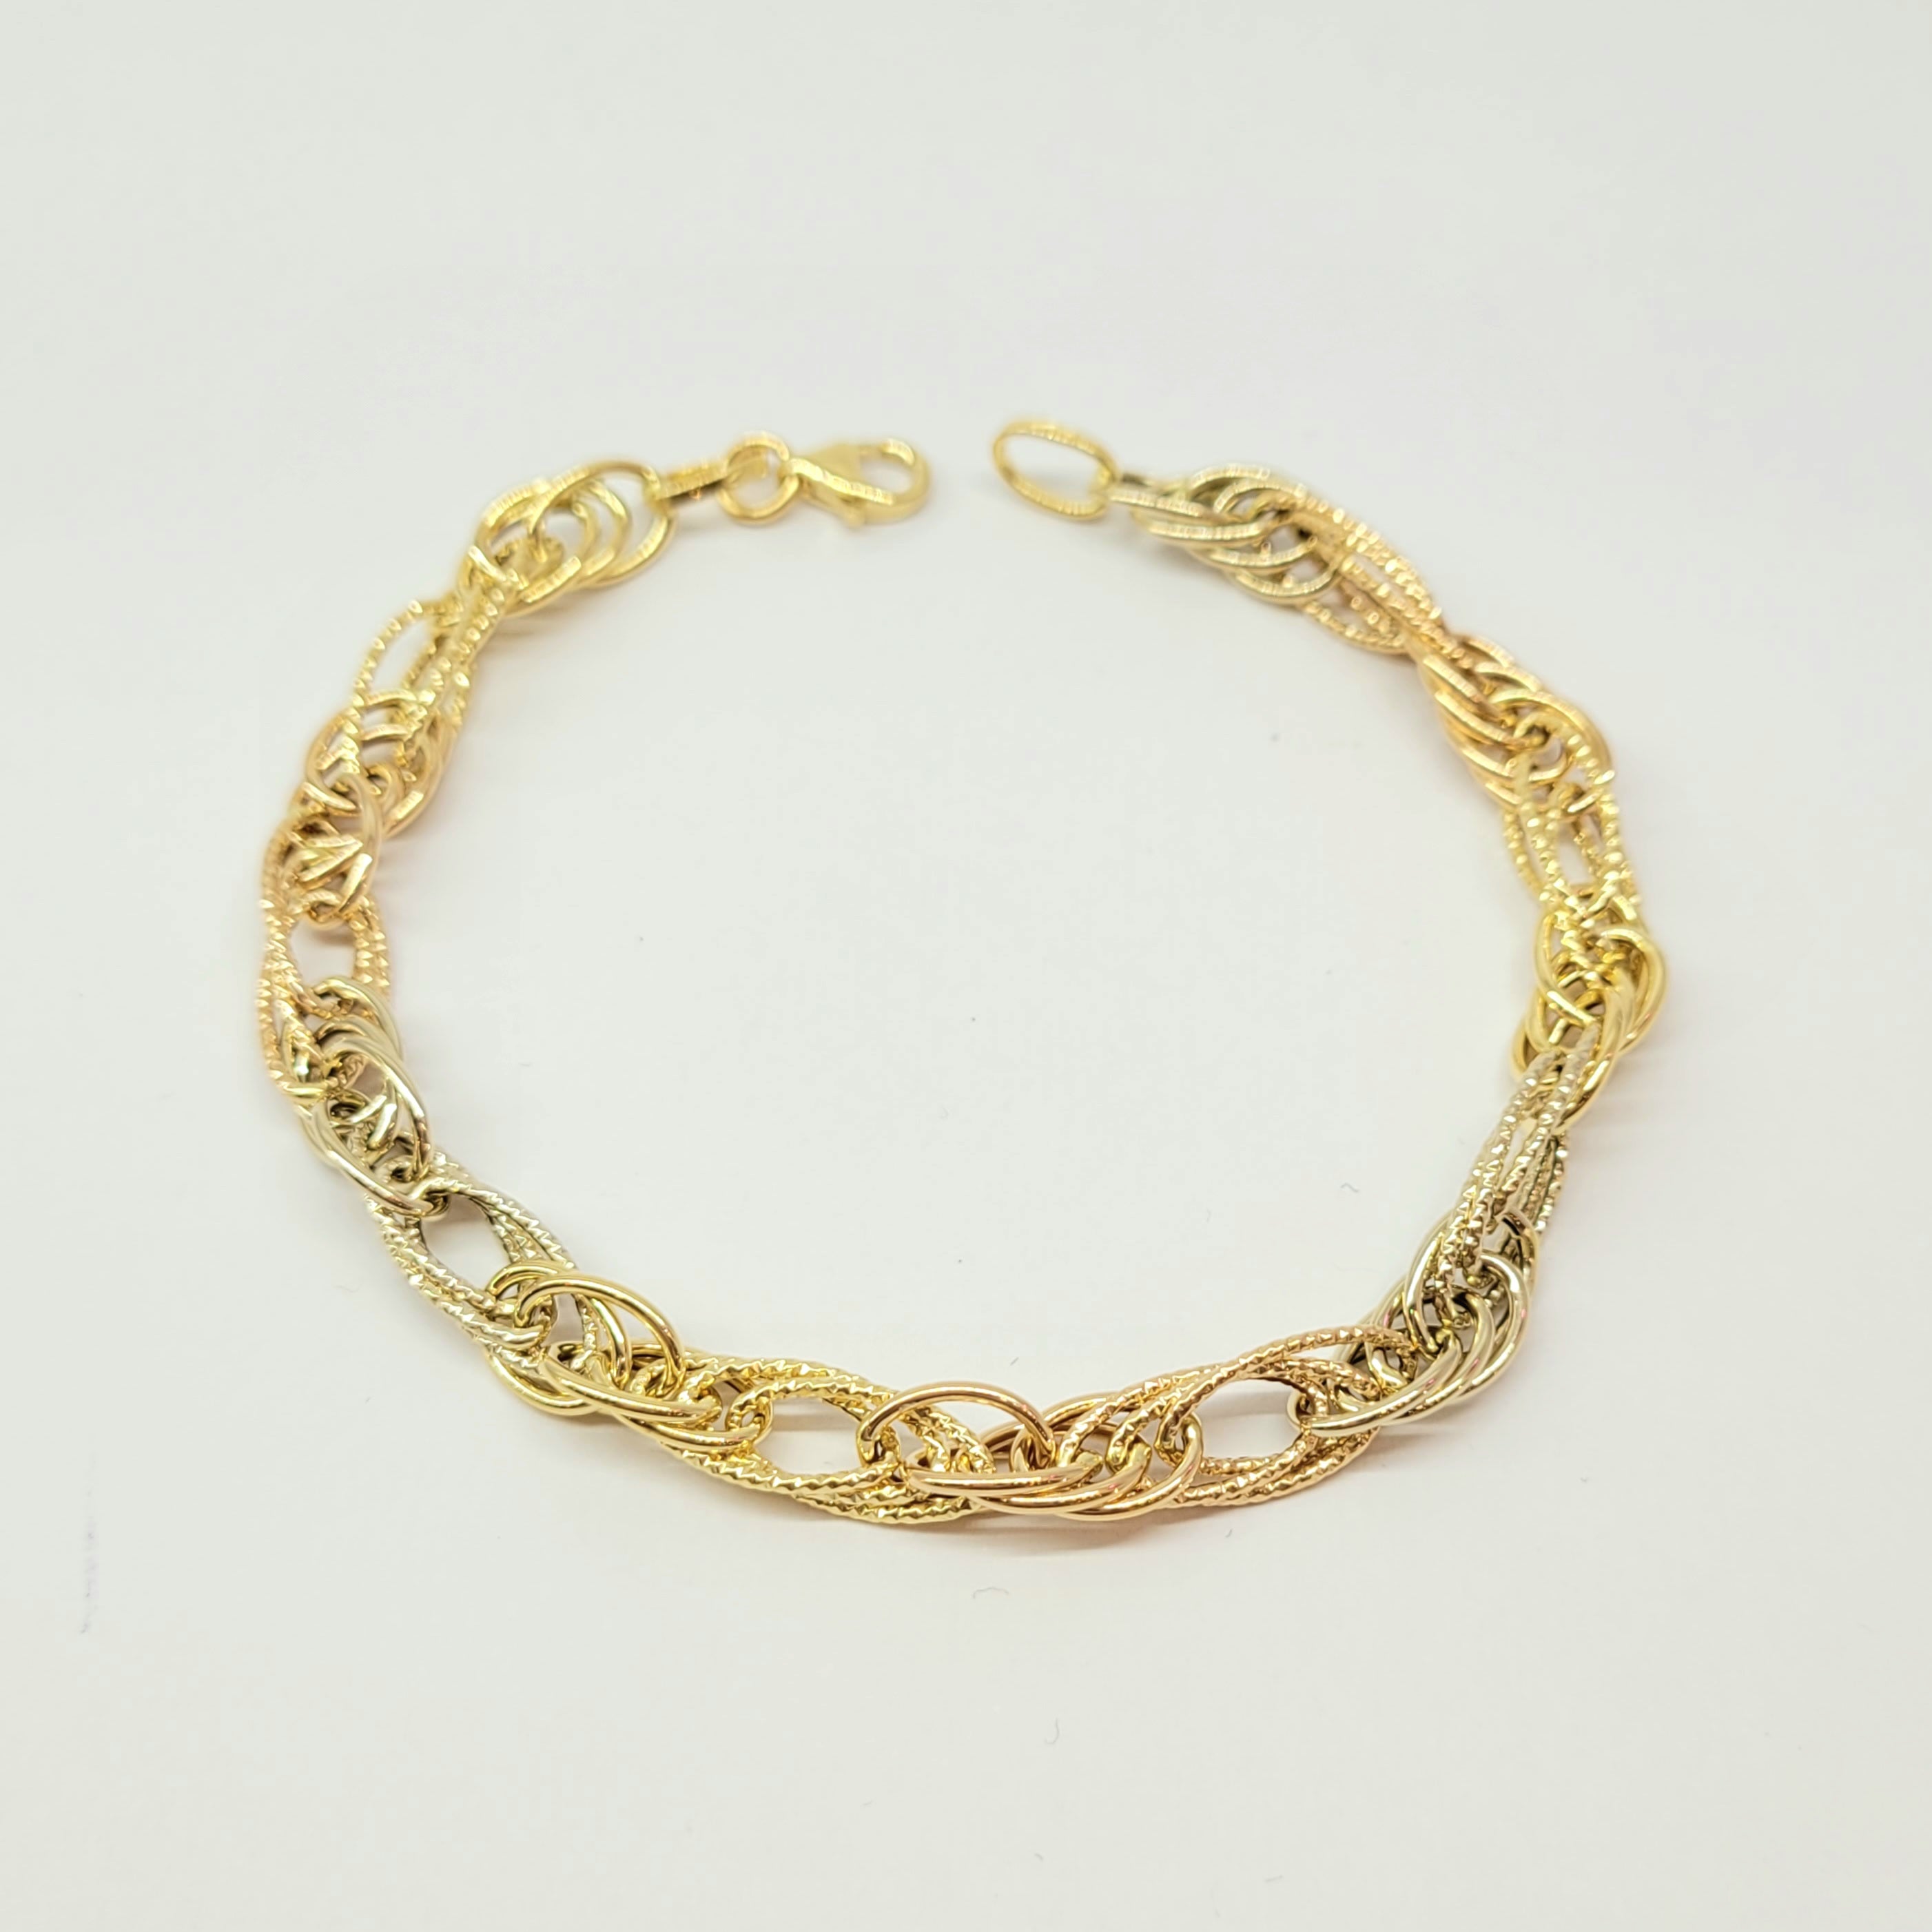 18K Solid Gold Bracelets for Women, Yellow Gold Beads Ball Bracelet with  Durable Chain Jewelry Gifts for Her, Mom, Wife, Girls 6.5 - 7.3